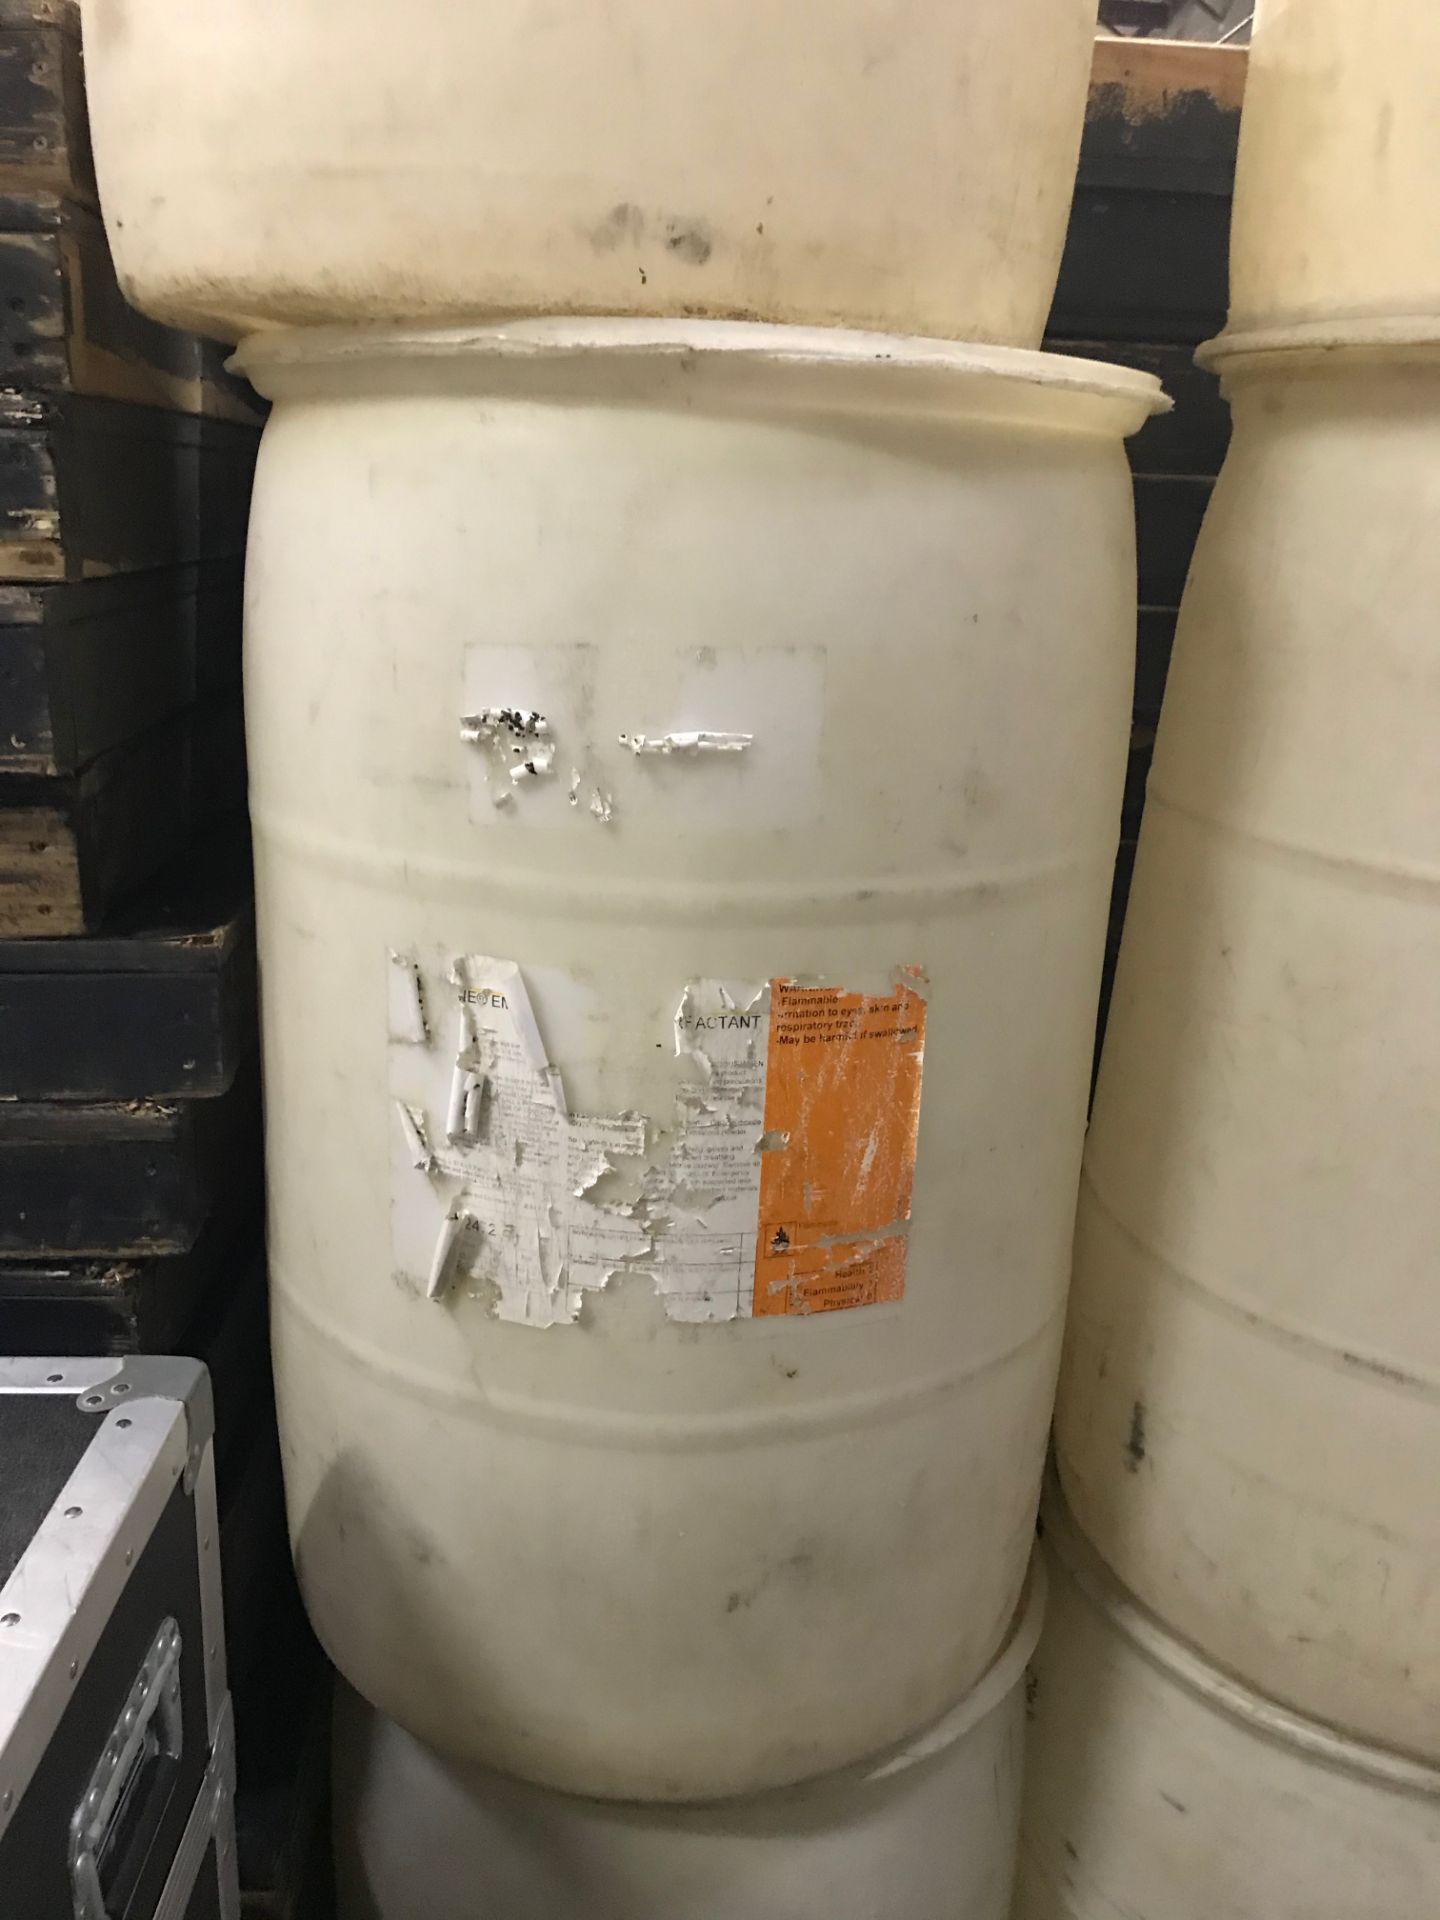 LOT OF: (4) 55 GALLON DRUMS W/ LIDS (USED FOR WATER WEIGHTS FOR RIGGING) - Image 3 of 4